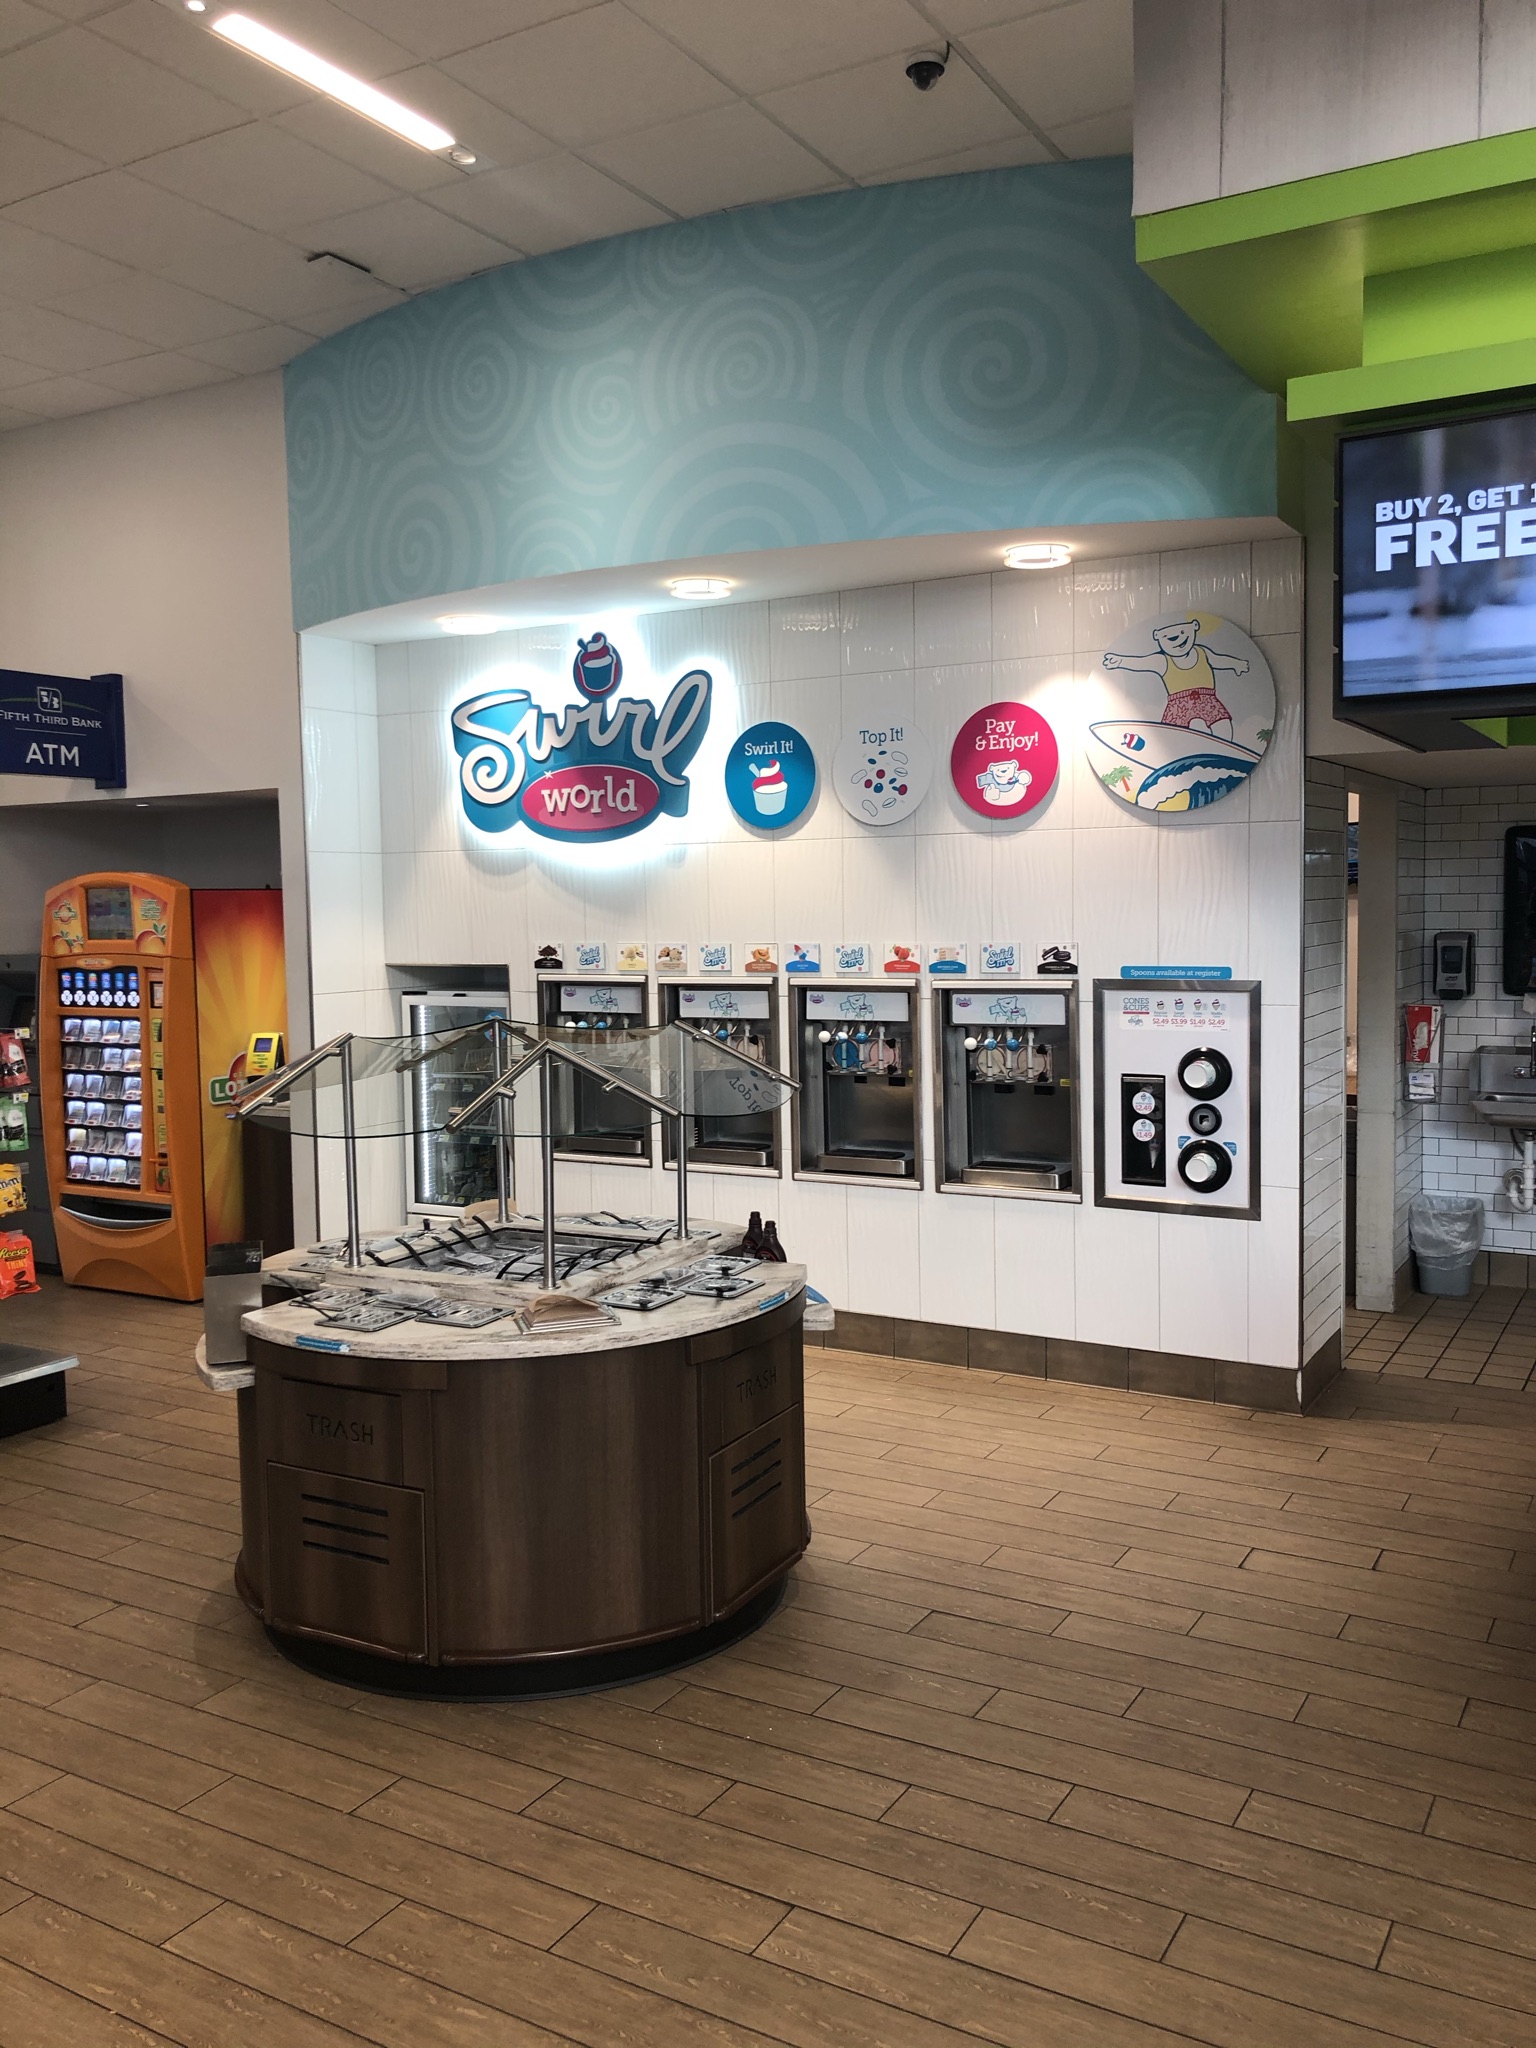 Available property at RaceTrac Swirl World Station